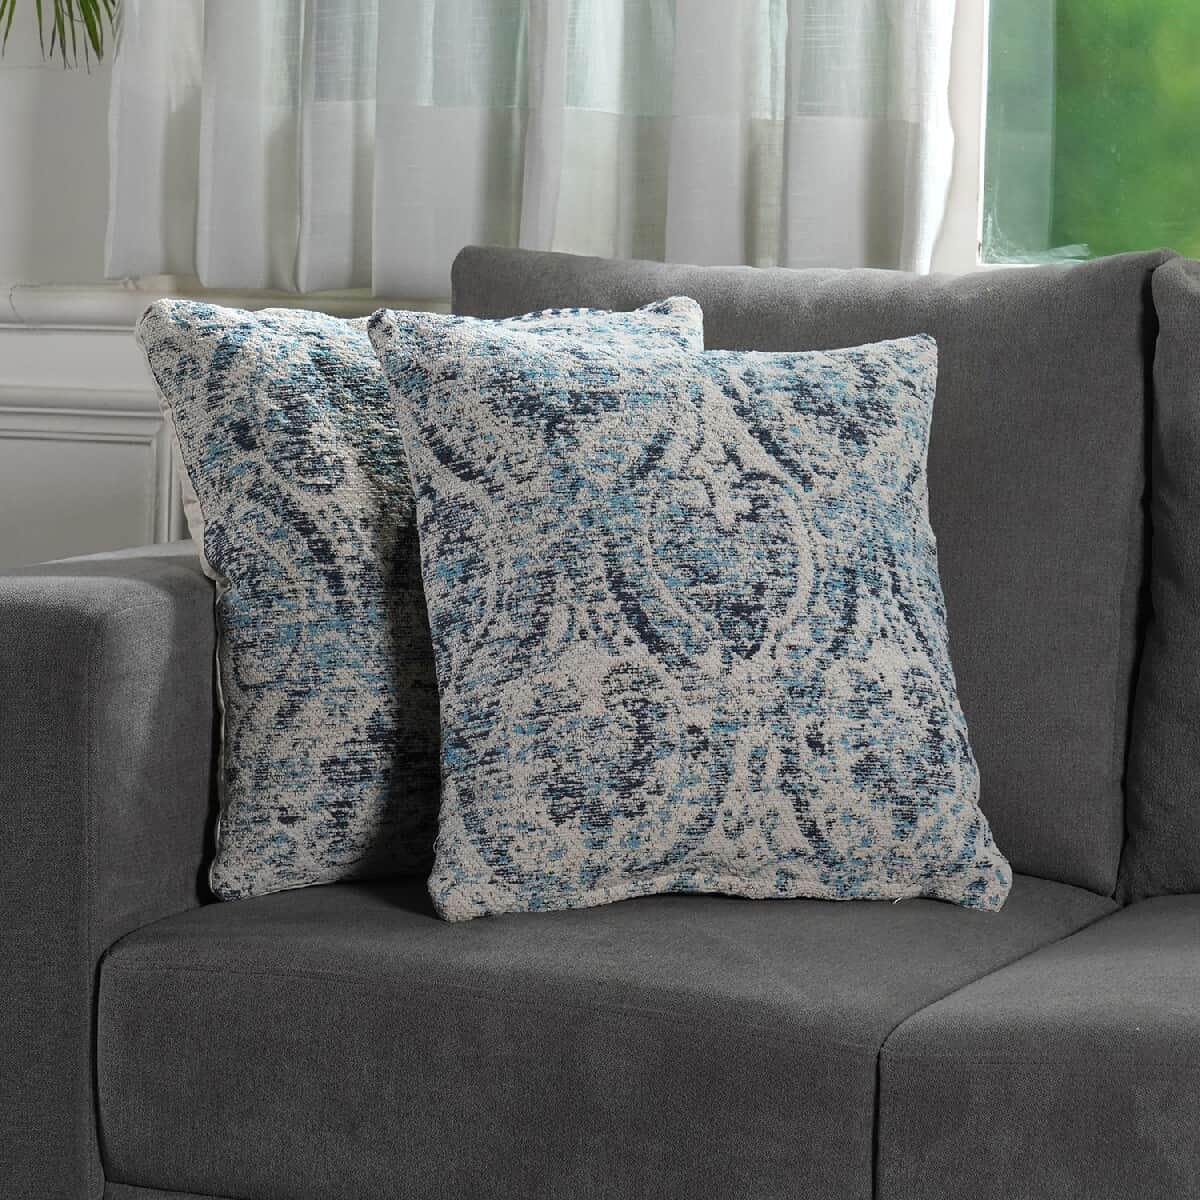 Set of 2 Gray Jacquard Woven Cushion Cover (18x18) image number 0